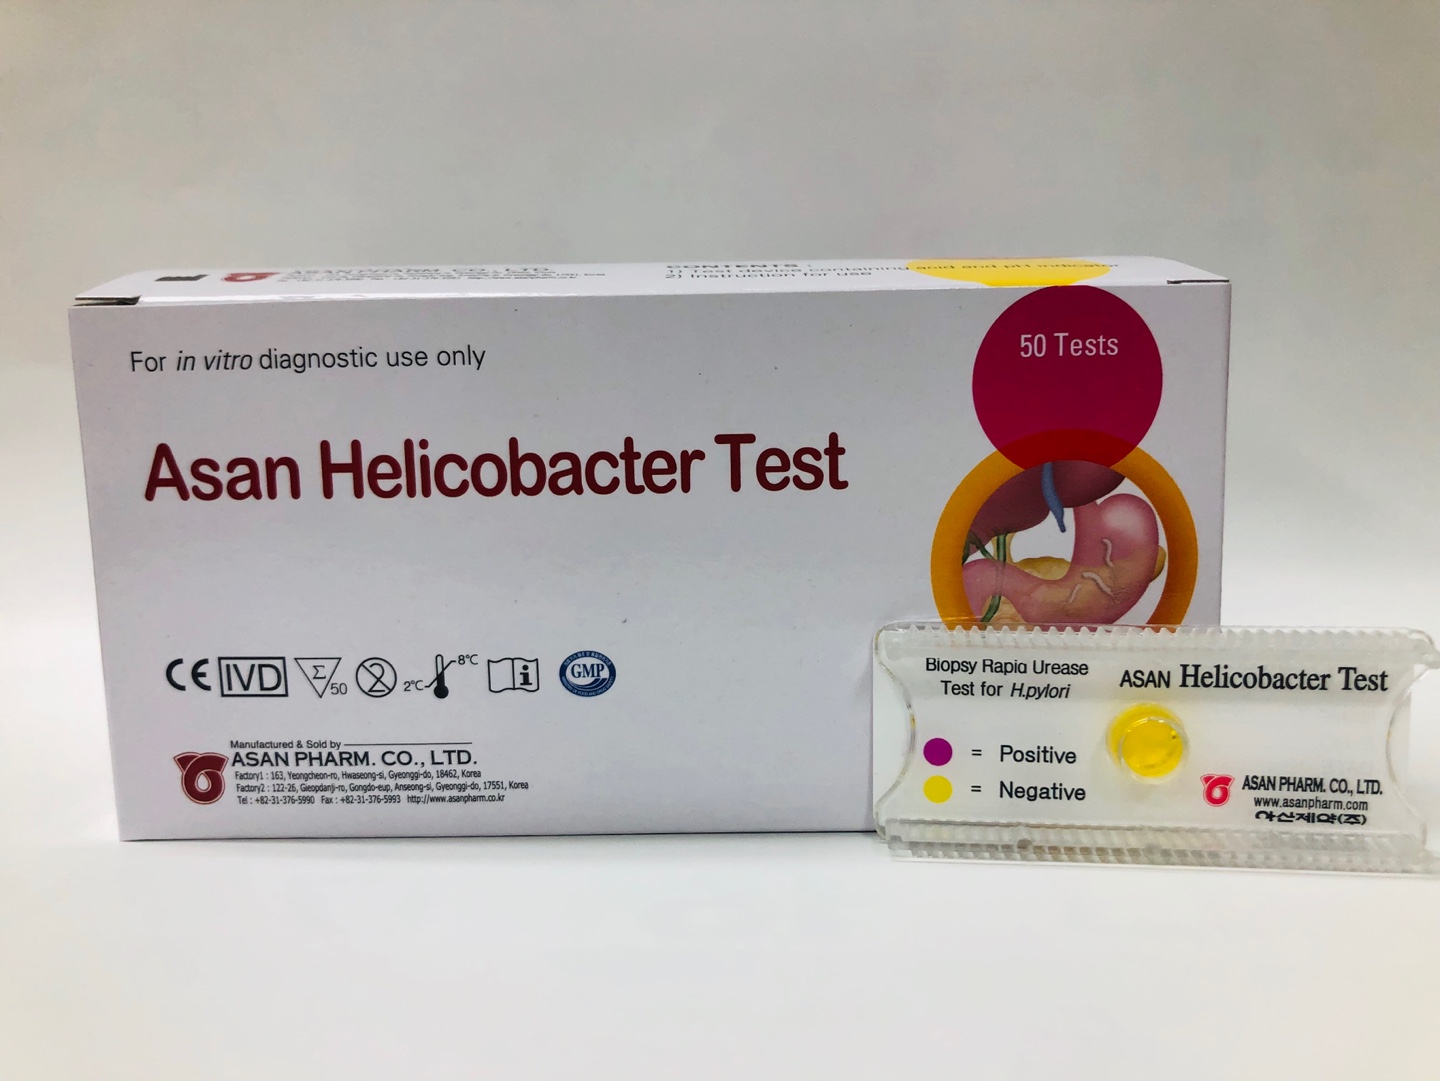 ASAN Helicobacter Test